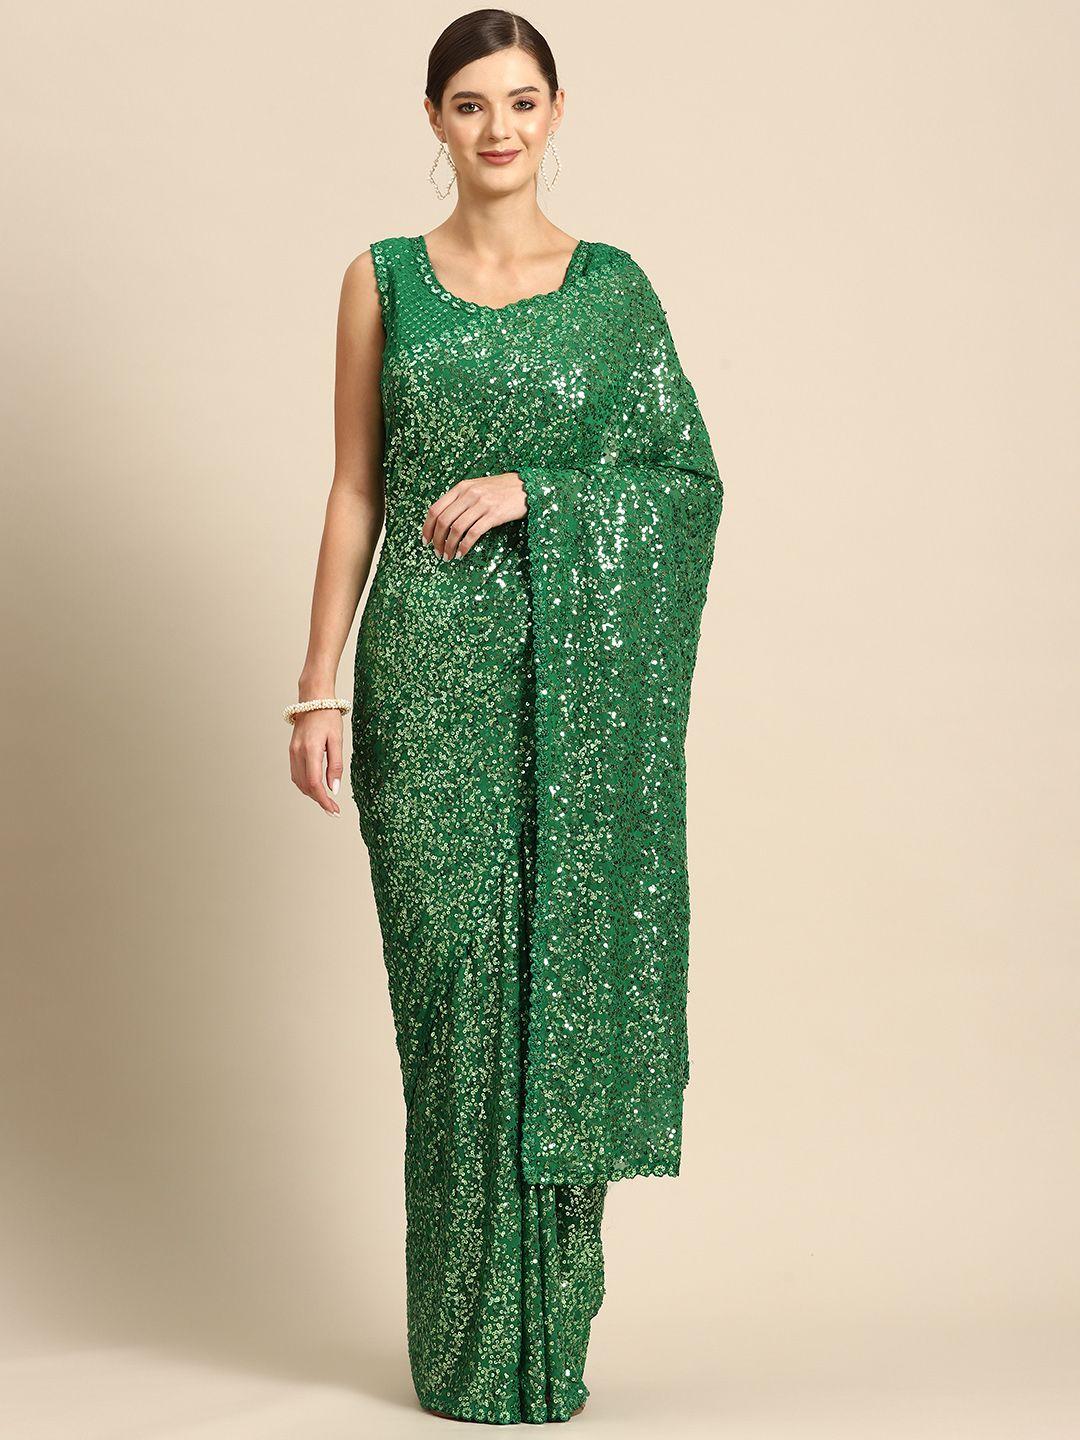 mizzific embellished sequinned georgette saree